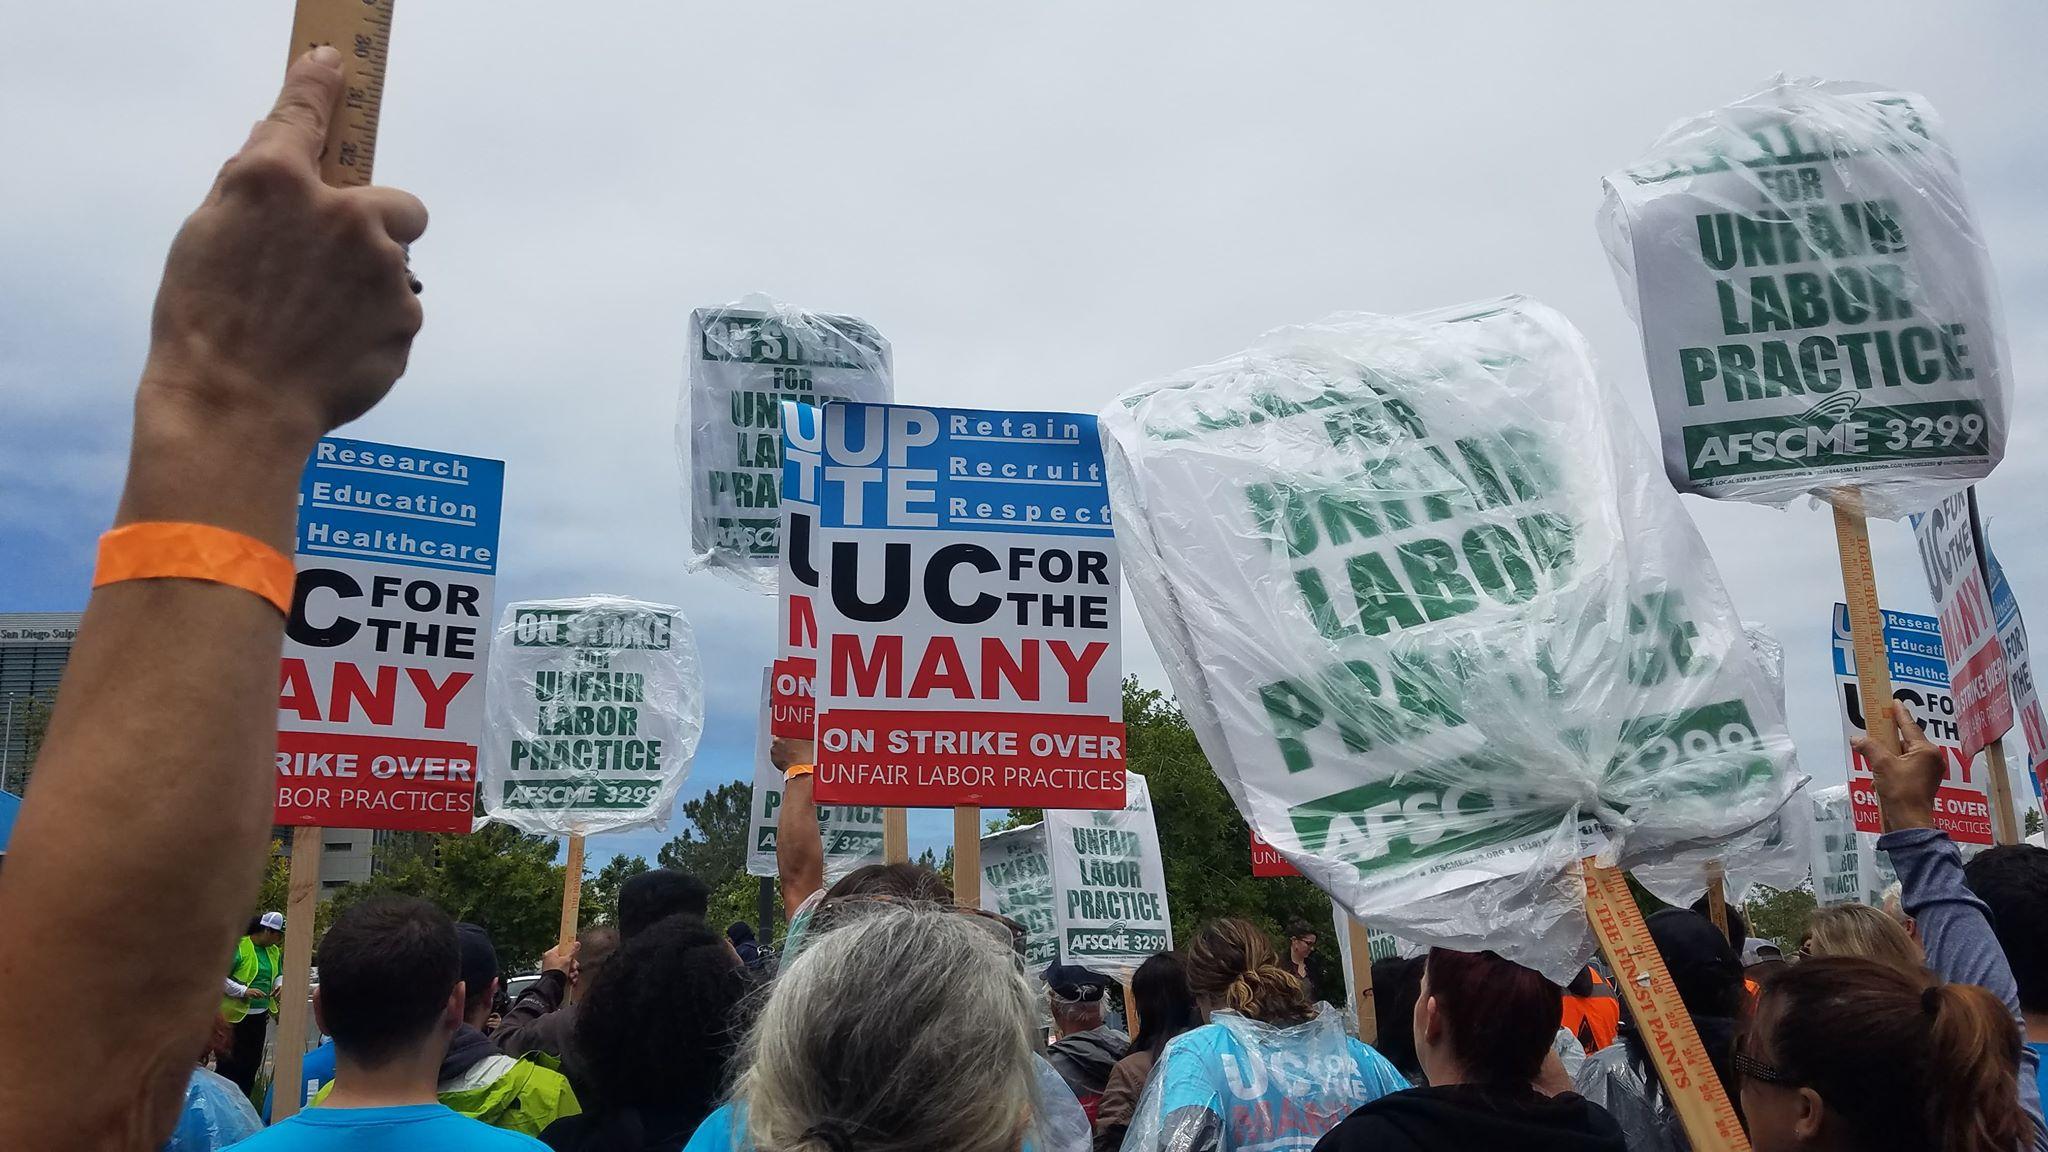 AFSCME Strikes for the Fifth Time This Year Across all UC Campuses